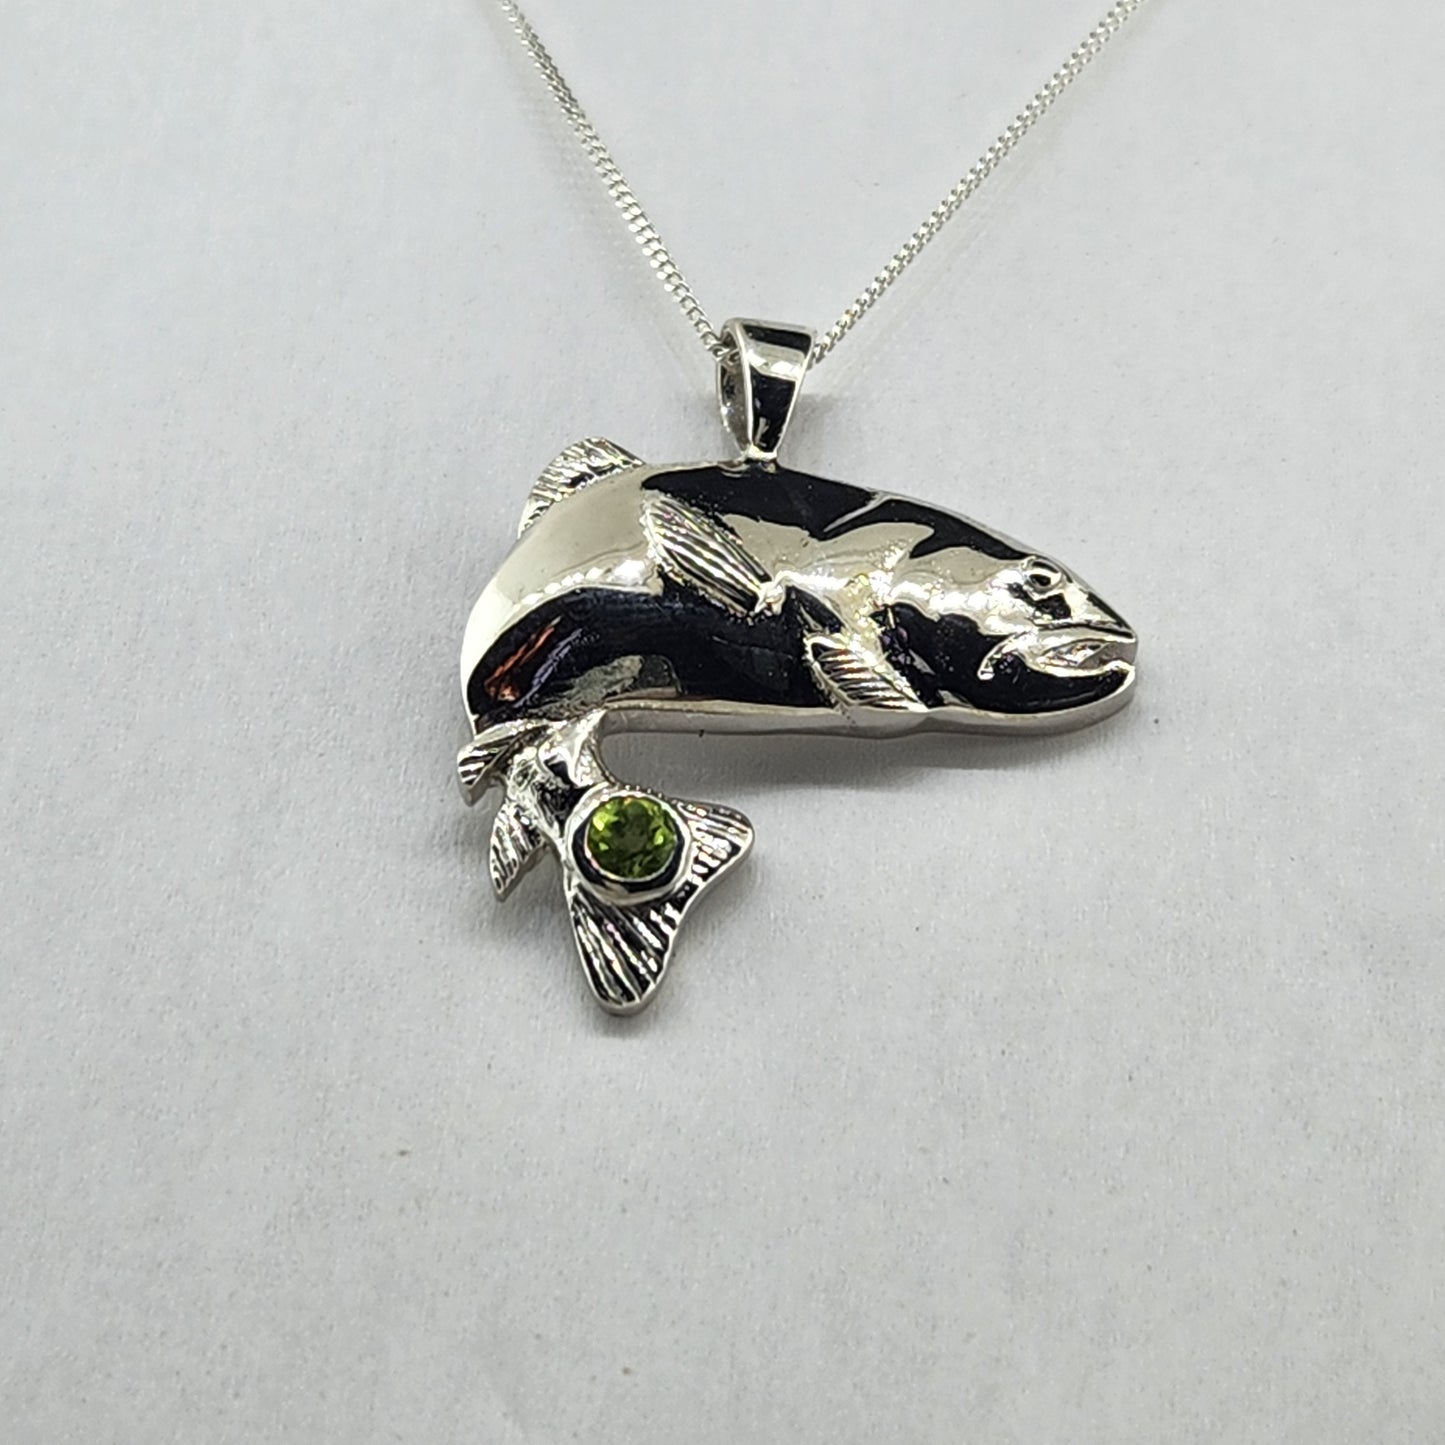 Fish Pendant in Sterling Silver with Peridot